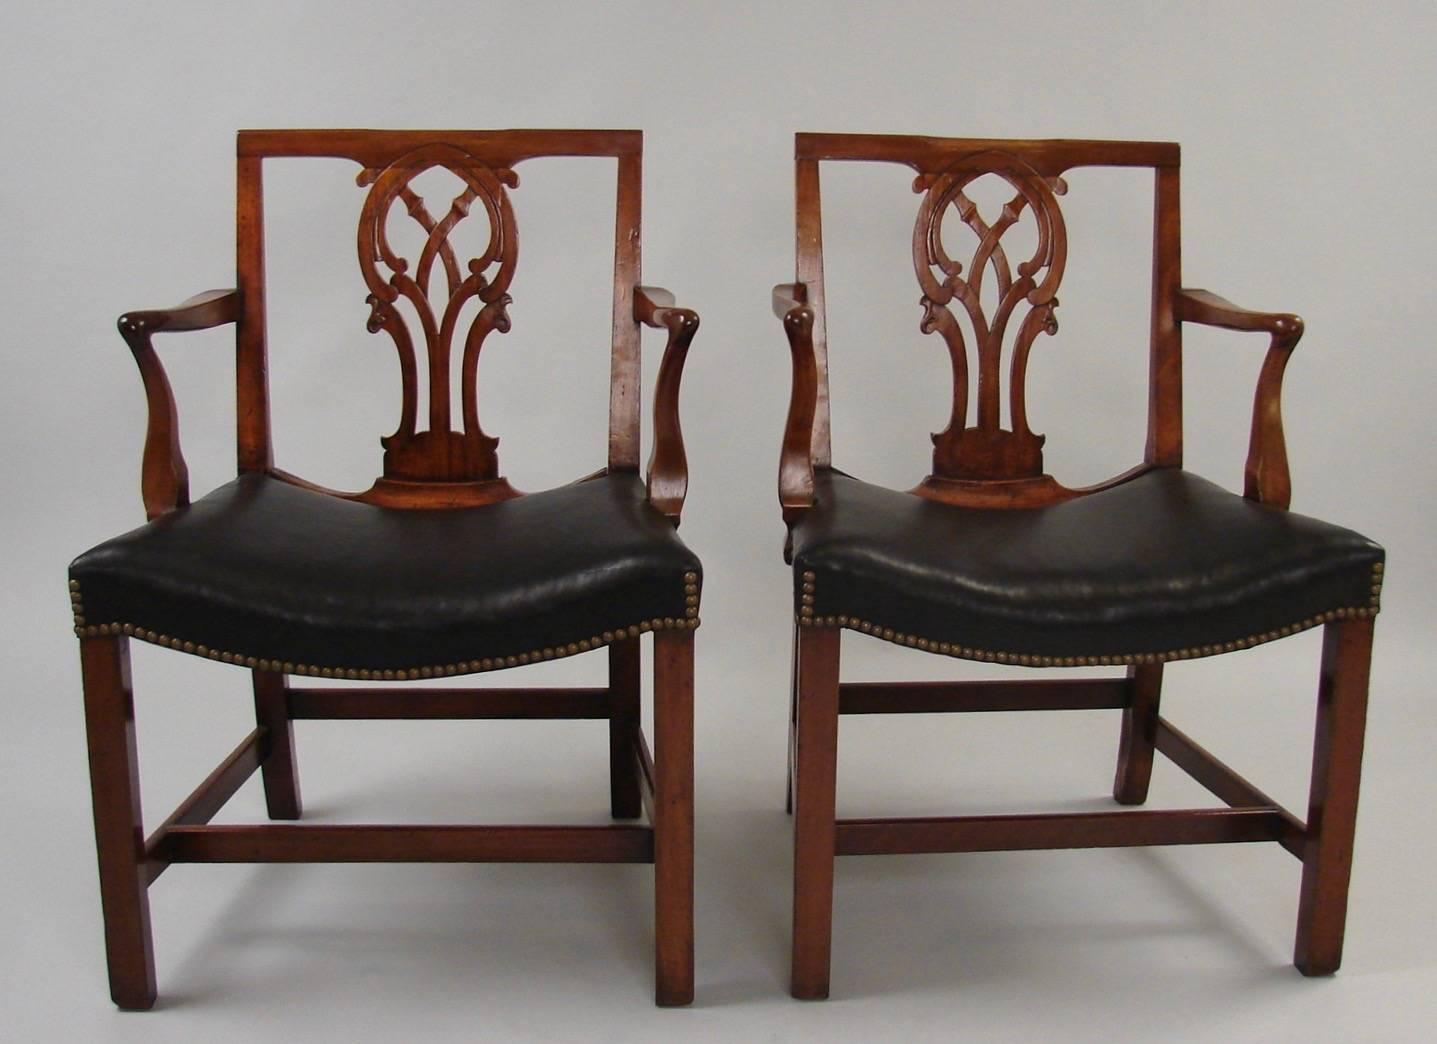 A fine and unusual set of 4 Georgian leather upholstered mahogany armchairs with nailhead trim, the square crest rail over an elaborate carved splat, the shaped arms terminating in a saddle seat, all supported on square legs joined by a box